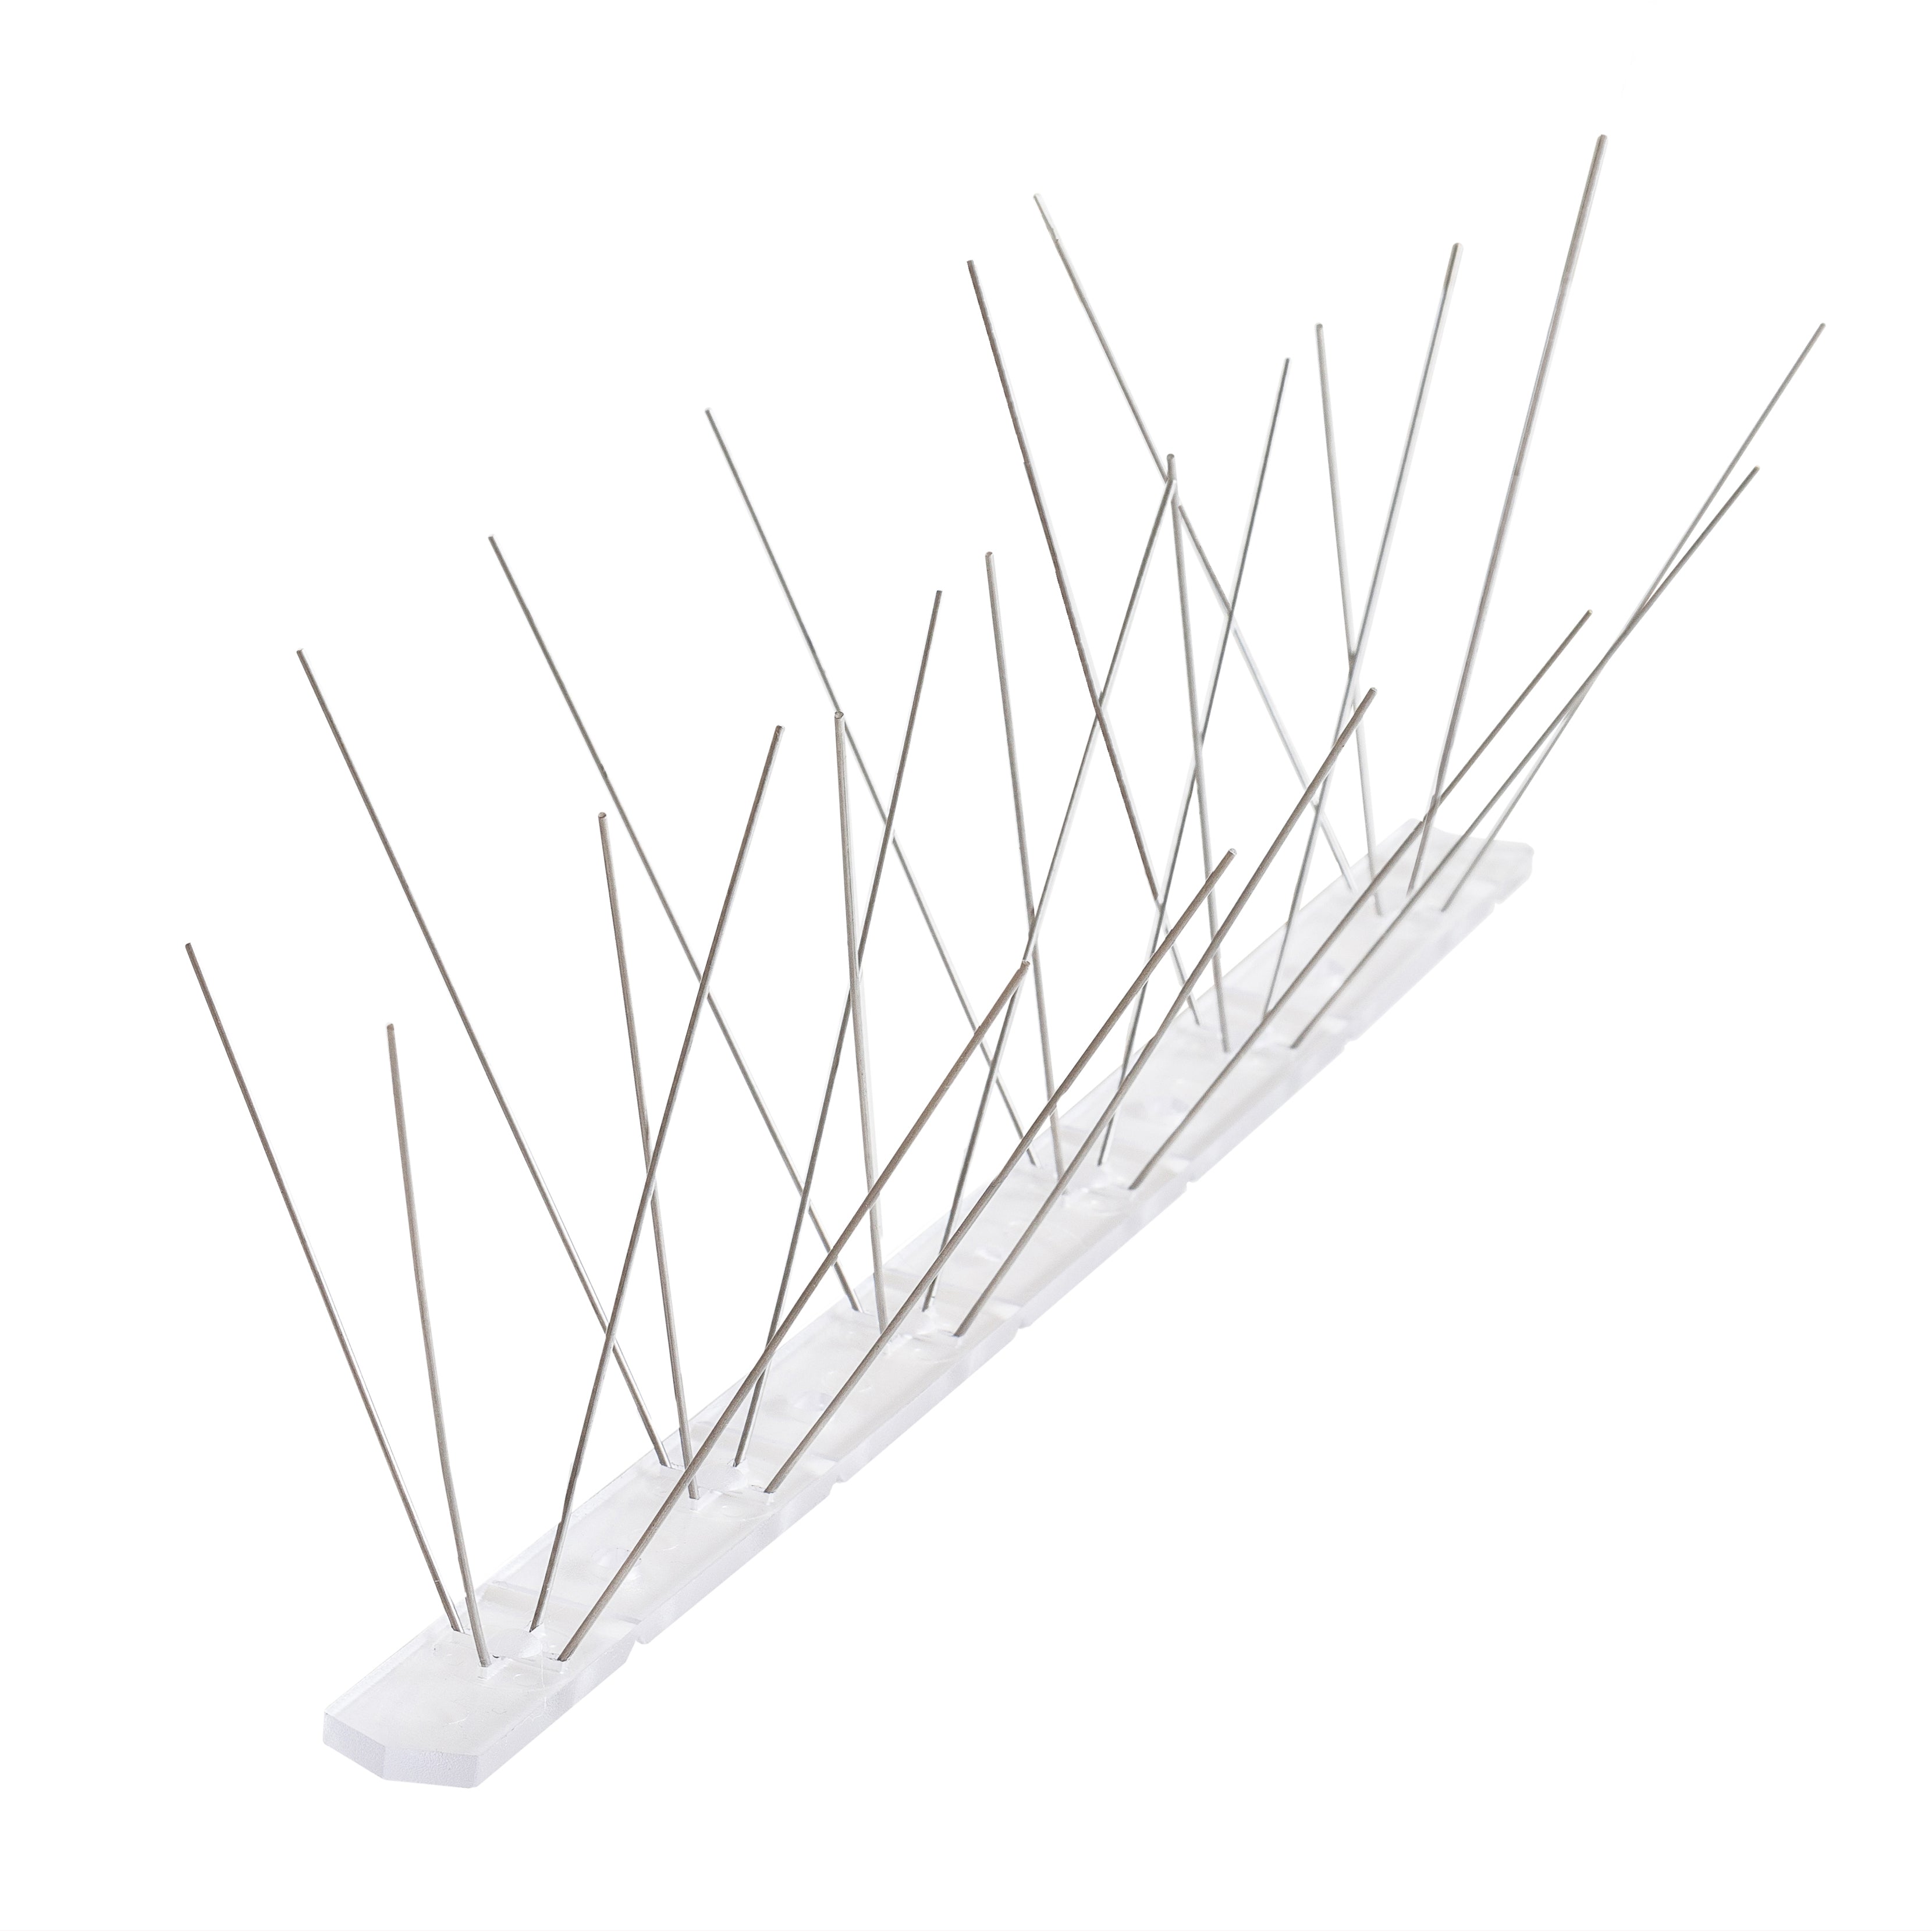 Stainless Steel Bird Spike - R66.95/m excl VAT